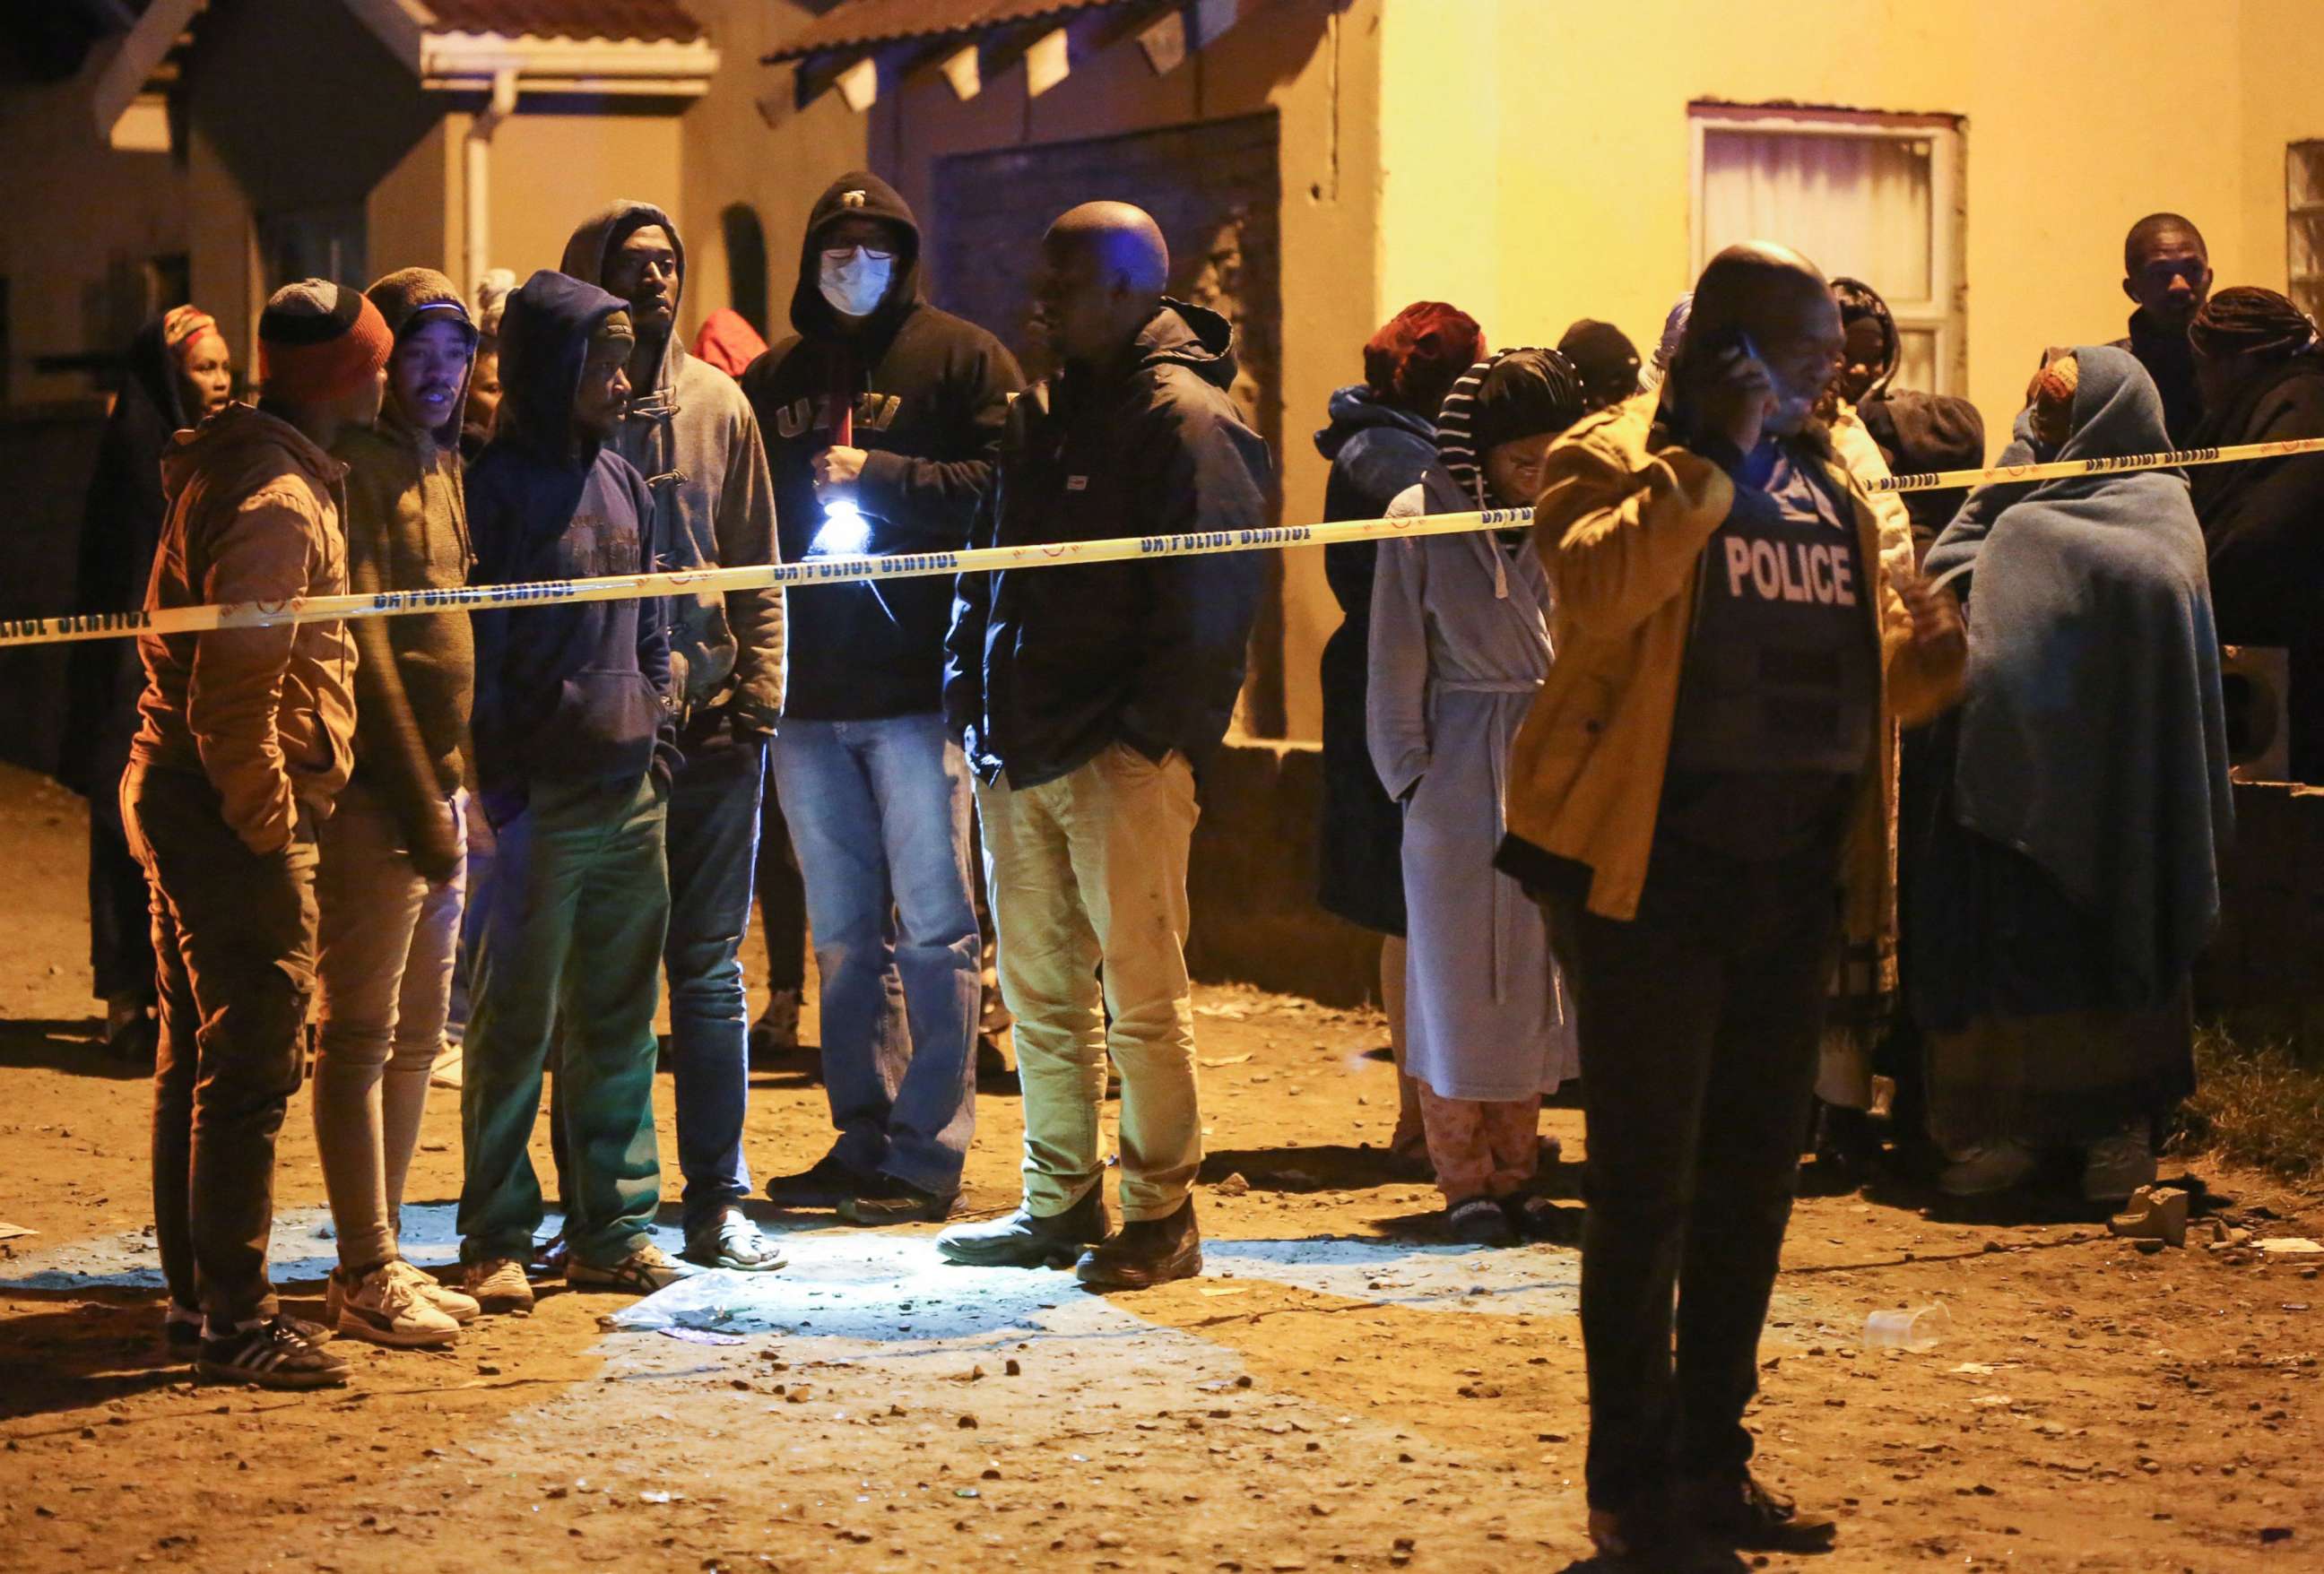 PHOTO: People, including family members, wait for news outside a township pub in South Africa's southern city of East London on June 26, 2022, after 20 teenagers died.